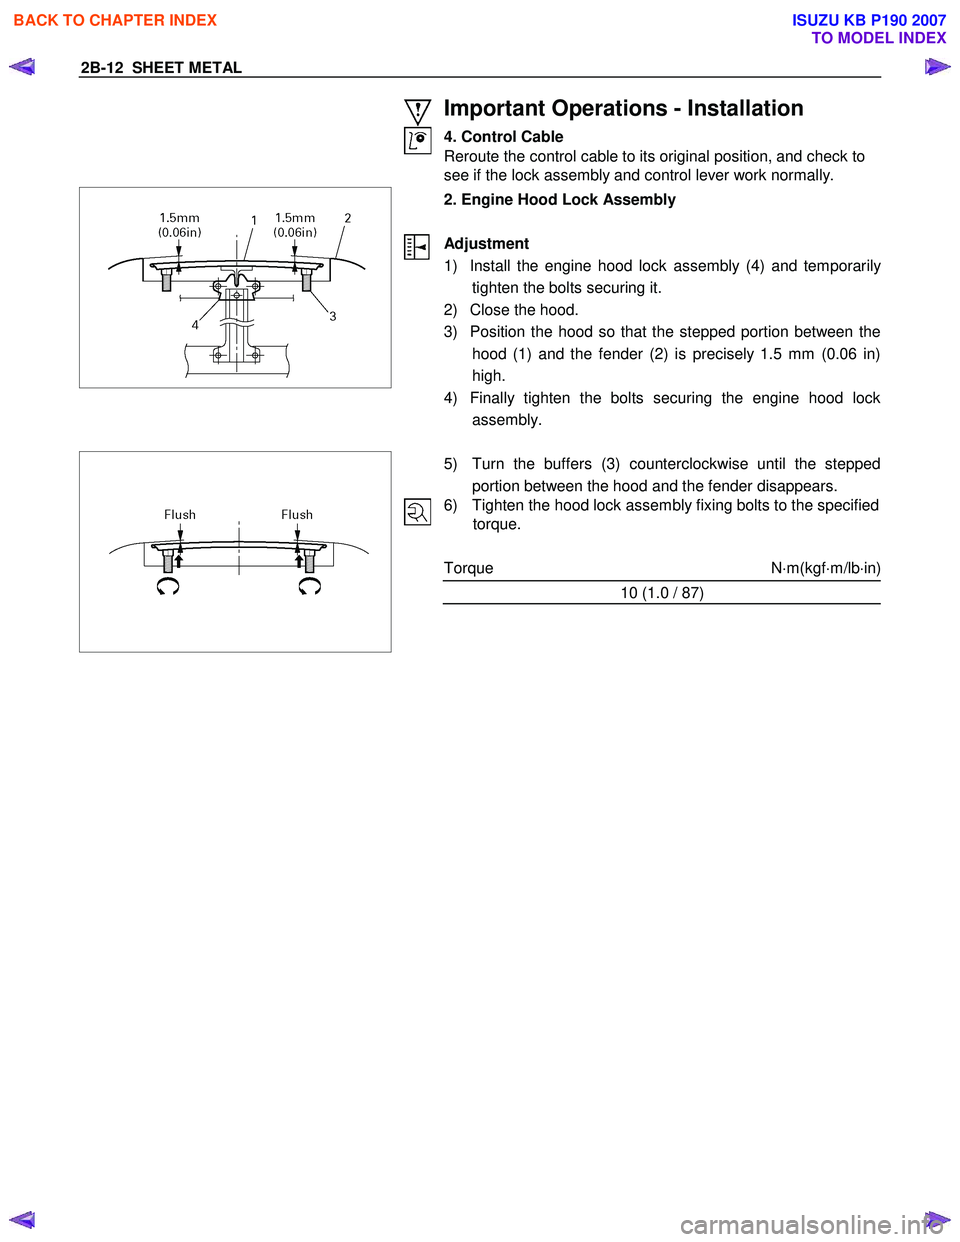 ISUZU KB P190 2007  Workshop Repair Manual 2B-12  SHEET METAL 
 
 
Important Operations - Installation 
4. Control Cable 
Reroute the control cable to its original position, and check to  
see if the lock assembly and control lever work normal